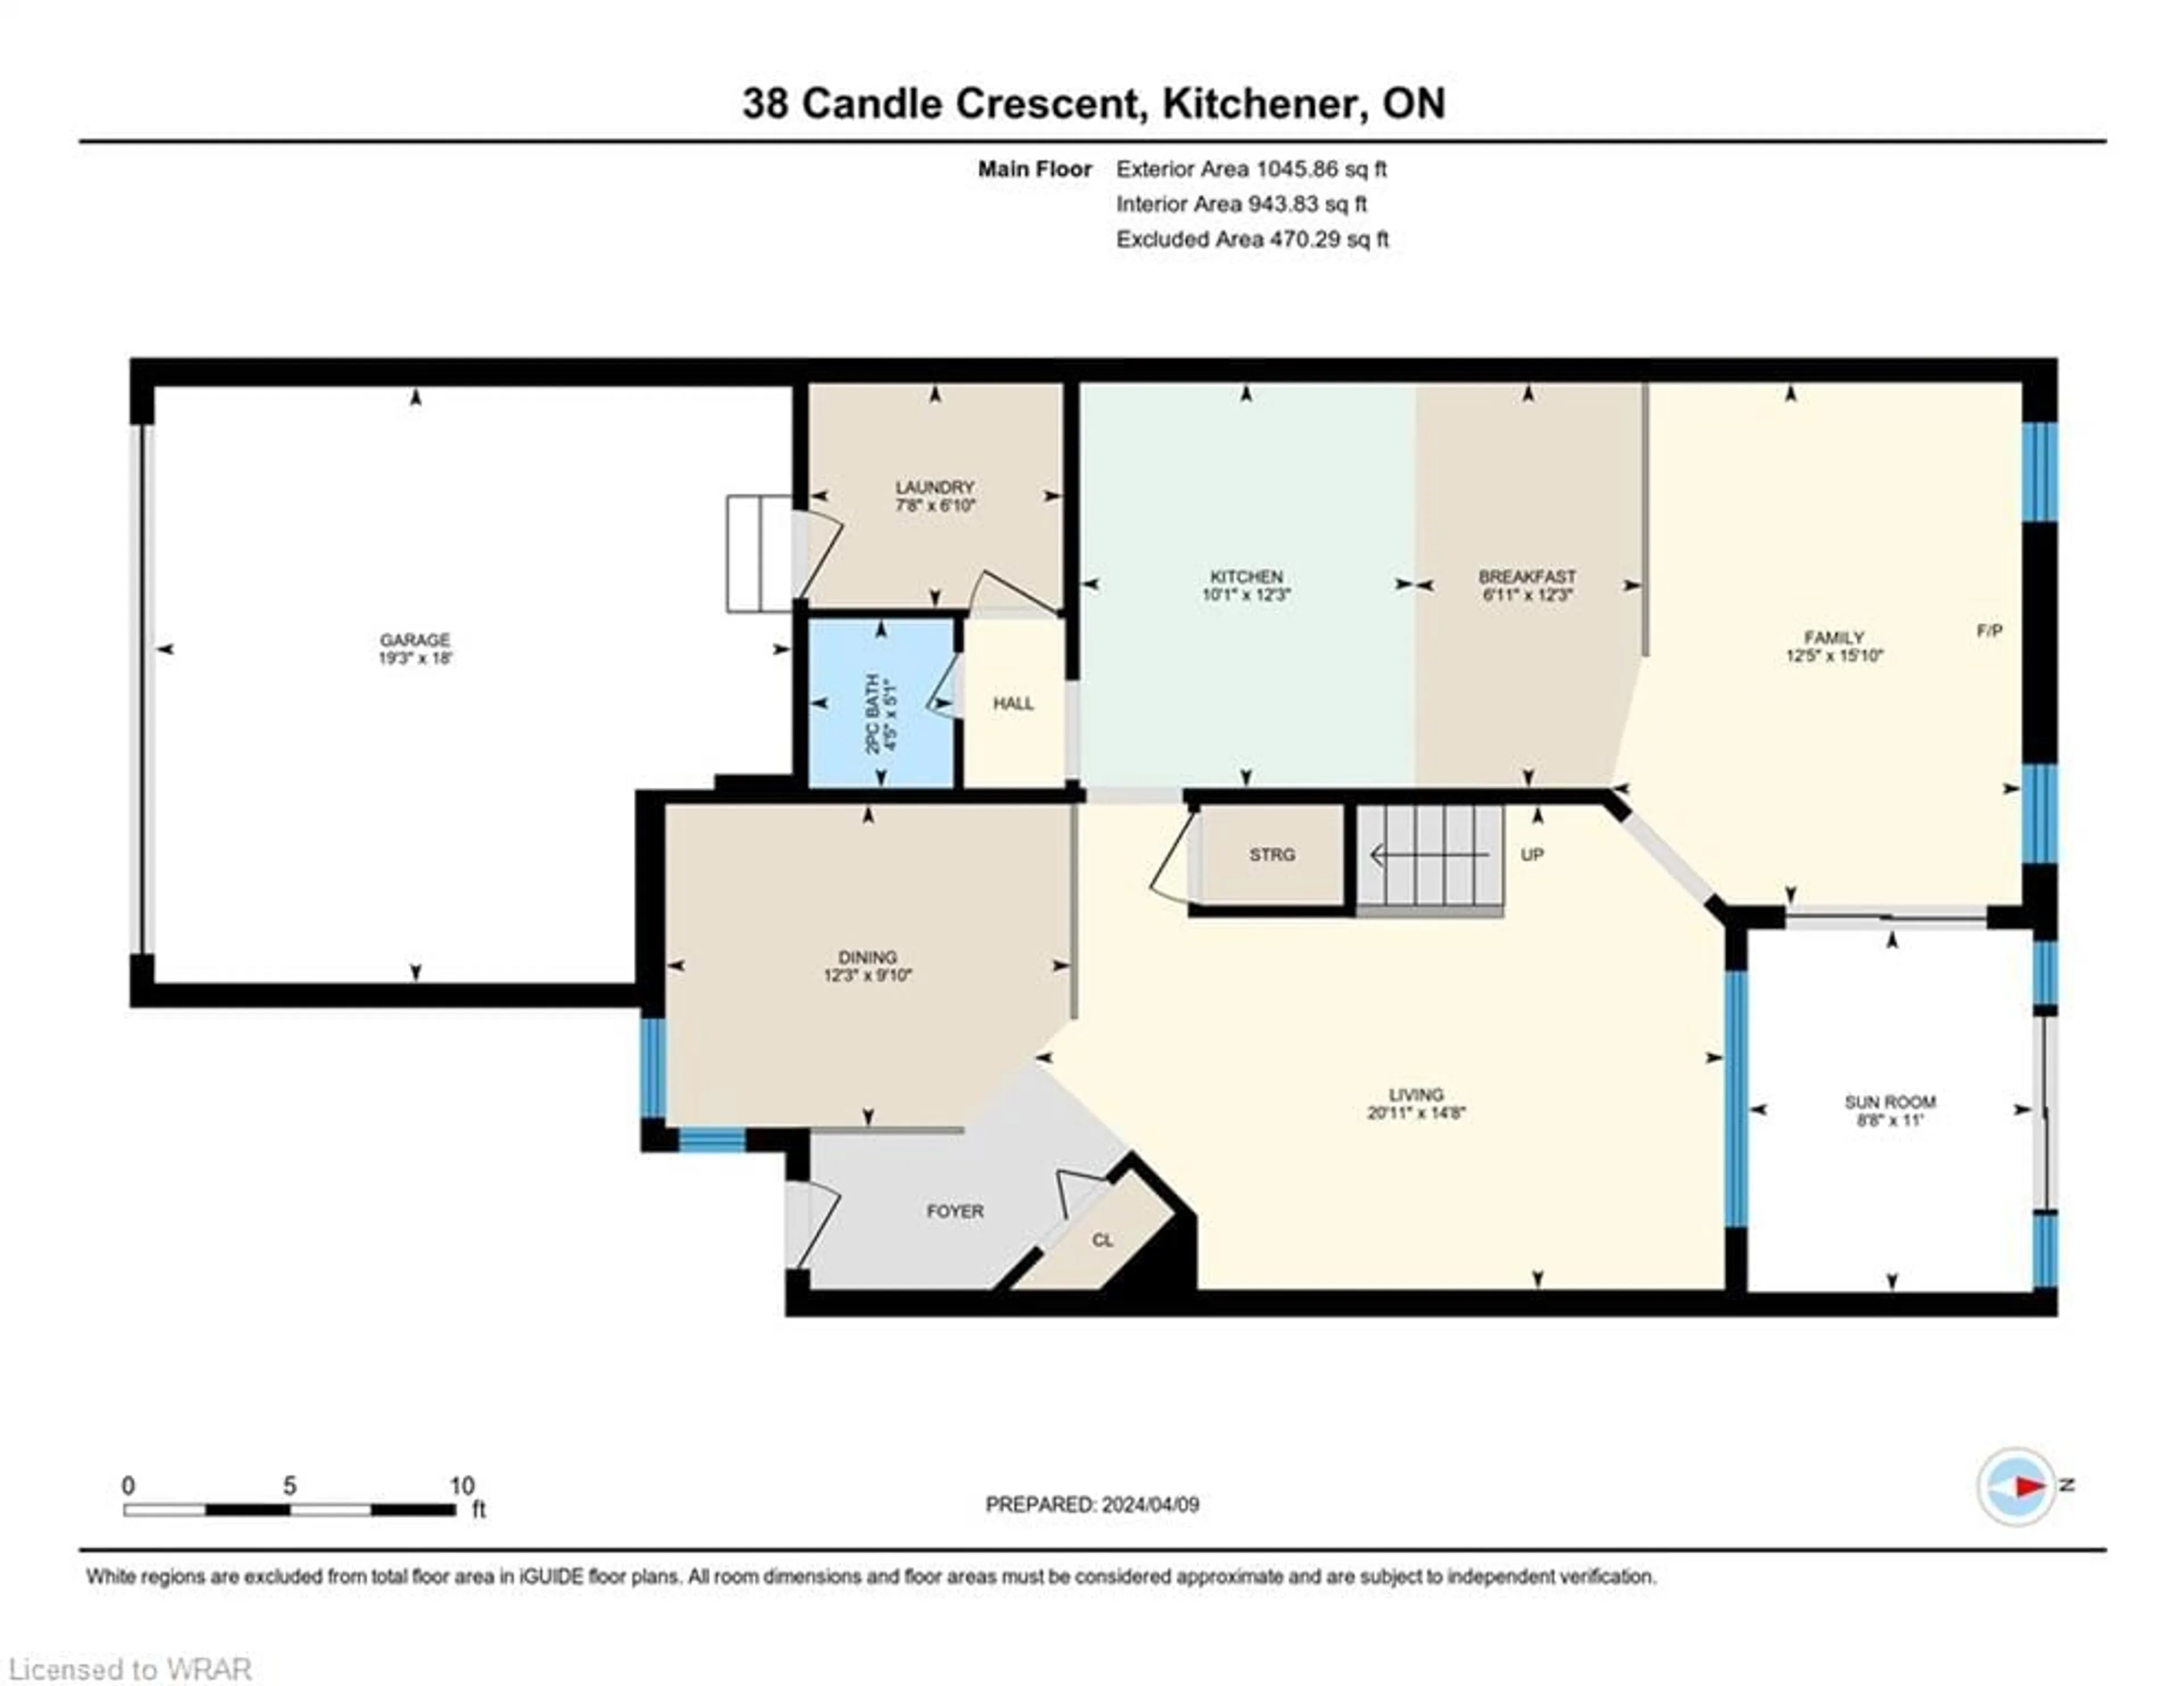 Floor plan for 38 Candle Cres, Kitchener Ontario N2P 2K7